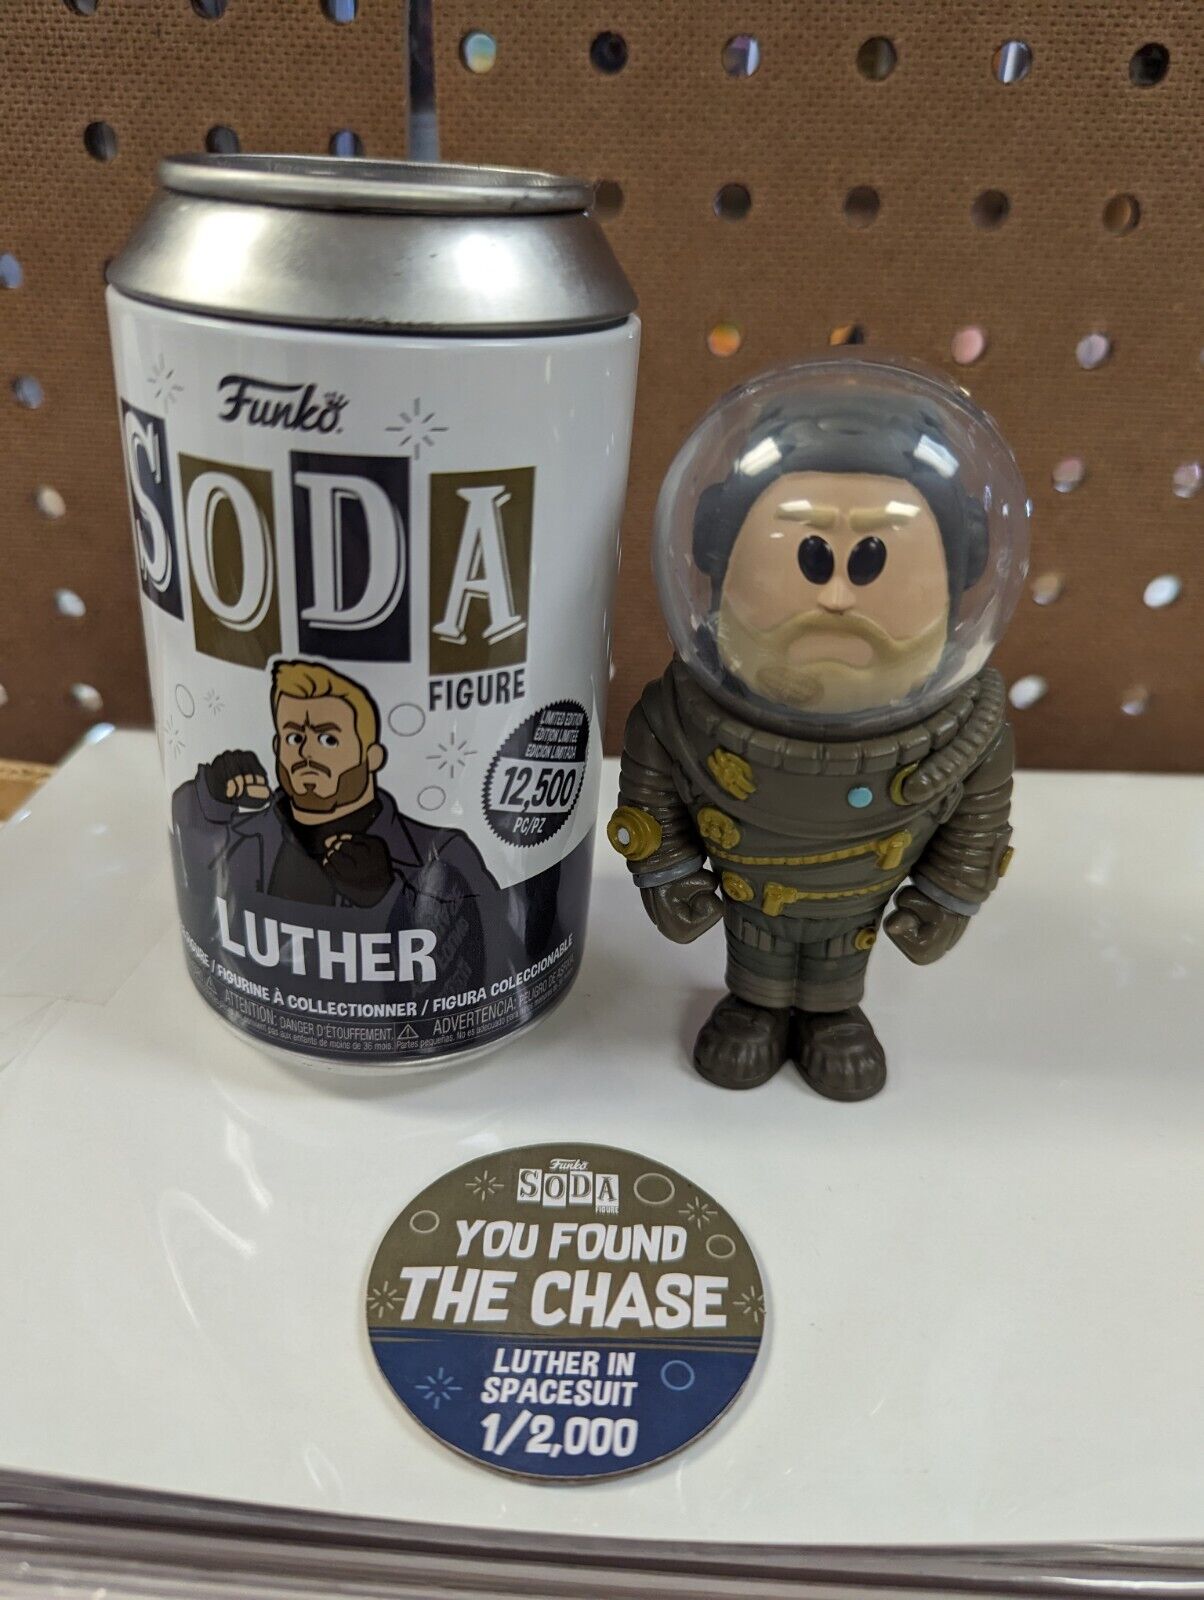 Funko Soda Luther In Spacesuit Chase 1/2000